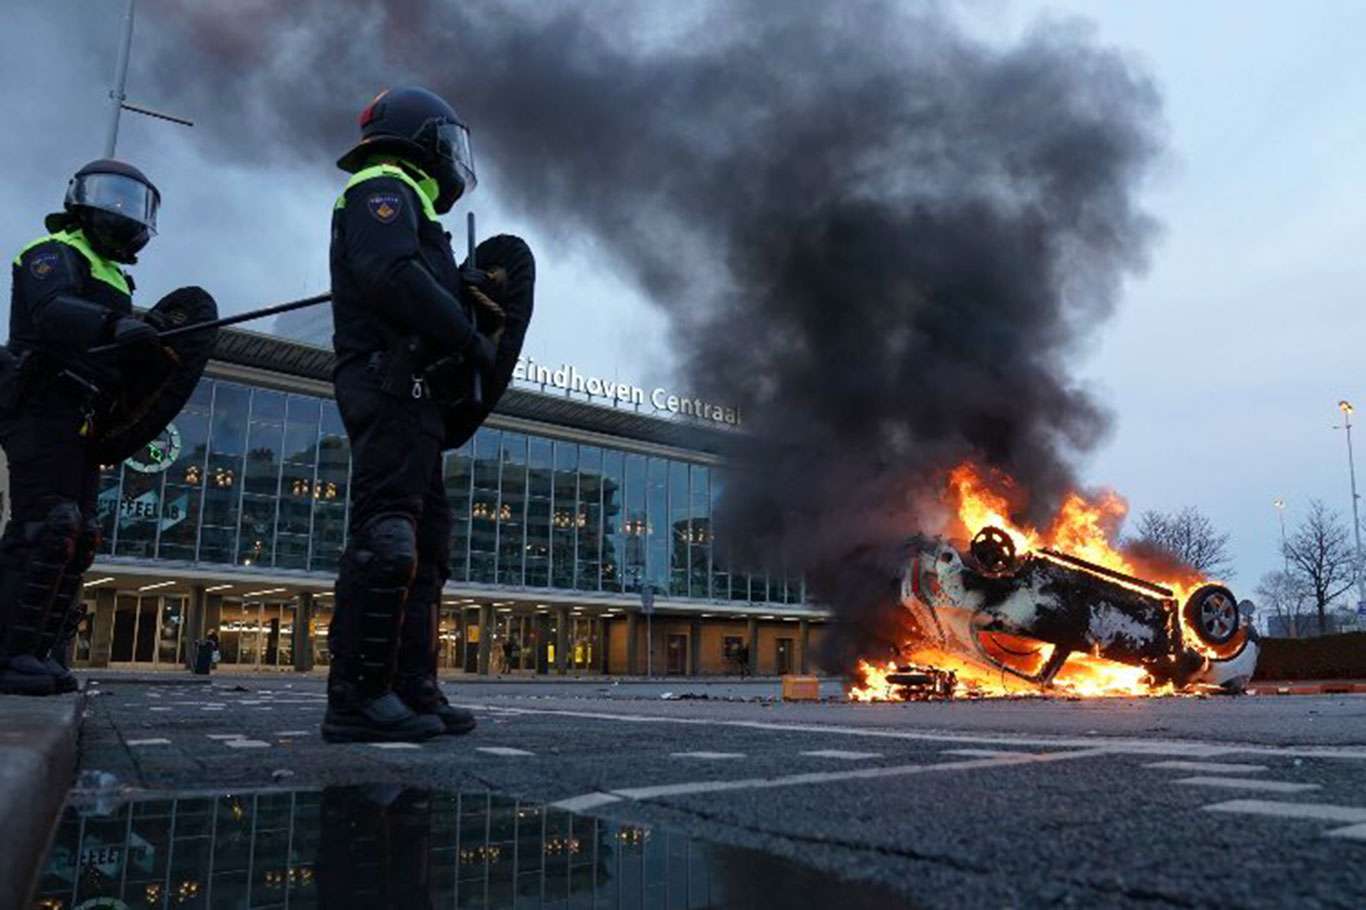 240 people detained after anti-lockdown protests turn violent in Netherlands